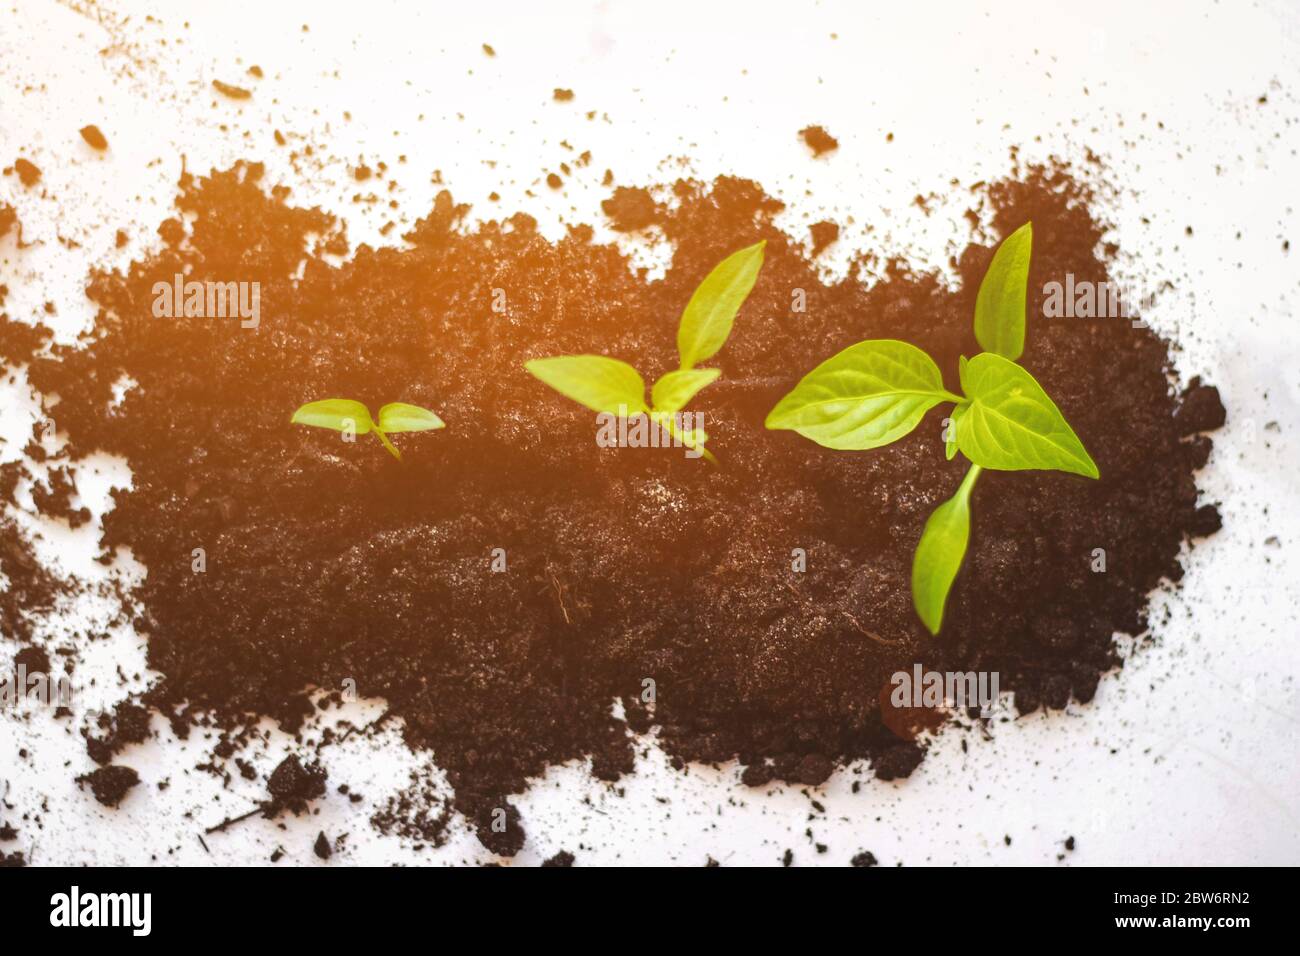 Plant growth evolution from seed to sapling, ecology concept. Growth Sequence - A sequence of seedlings growing progressively taller, isolated against Stock Photo